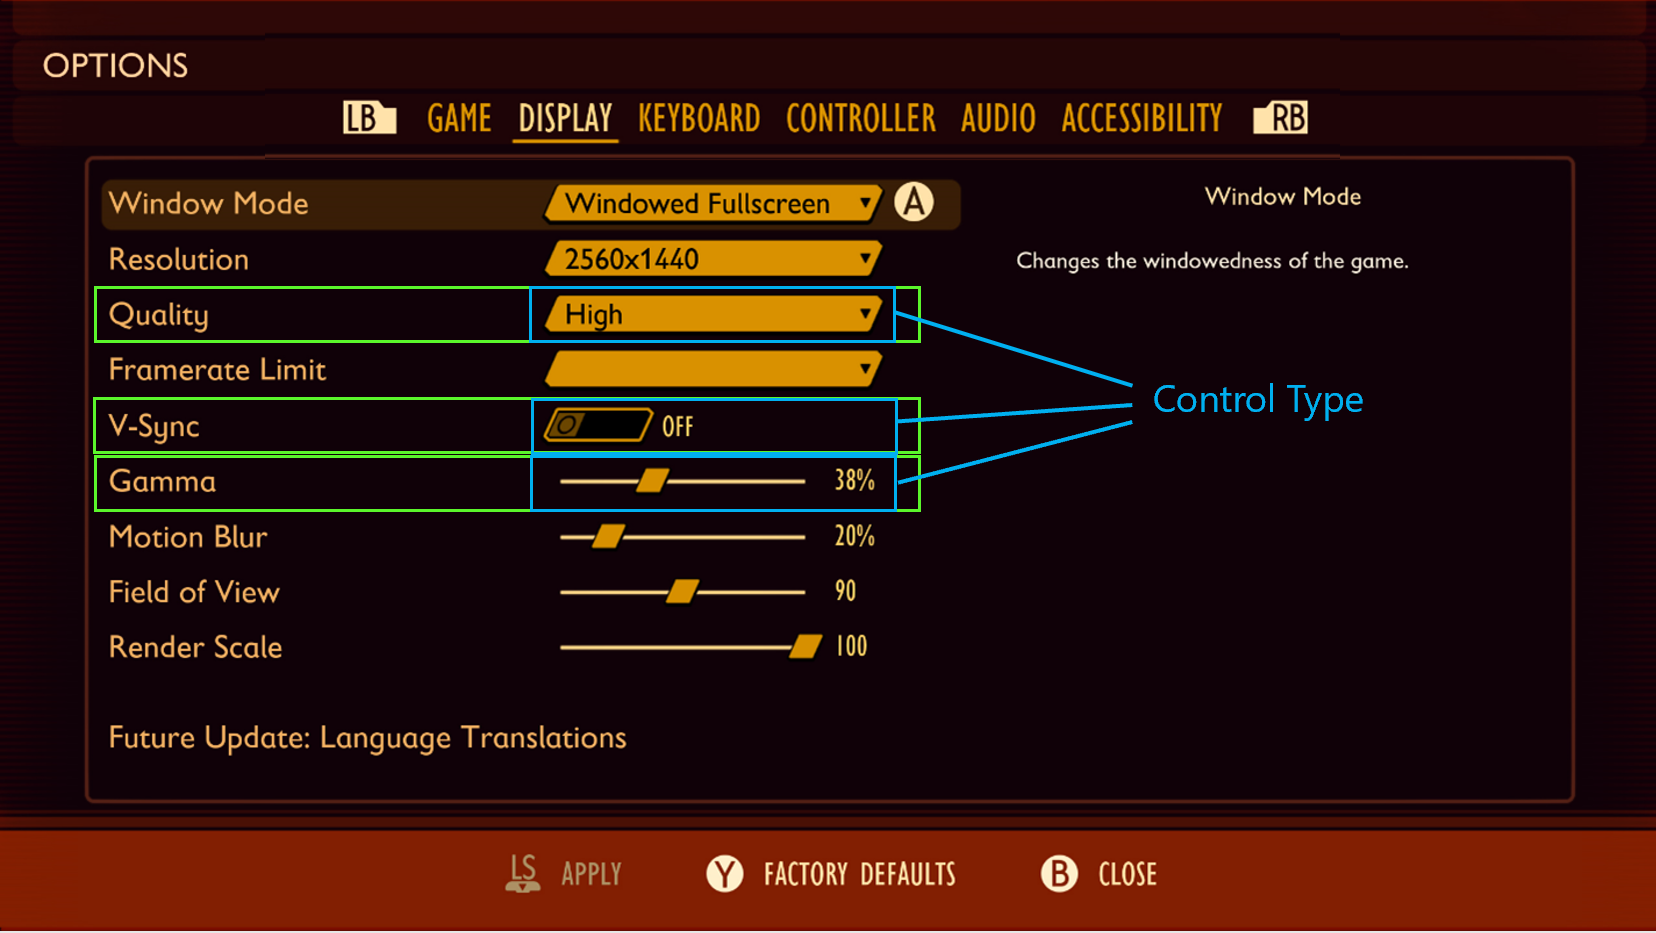 The display settings in Grounded. The name of the control next to each setting is highlighted and labeled "Control Type".